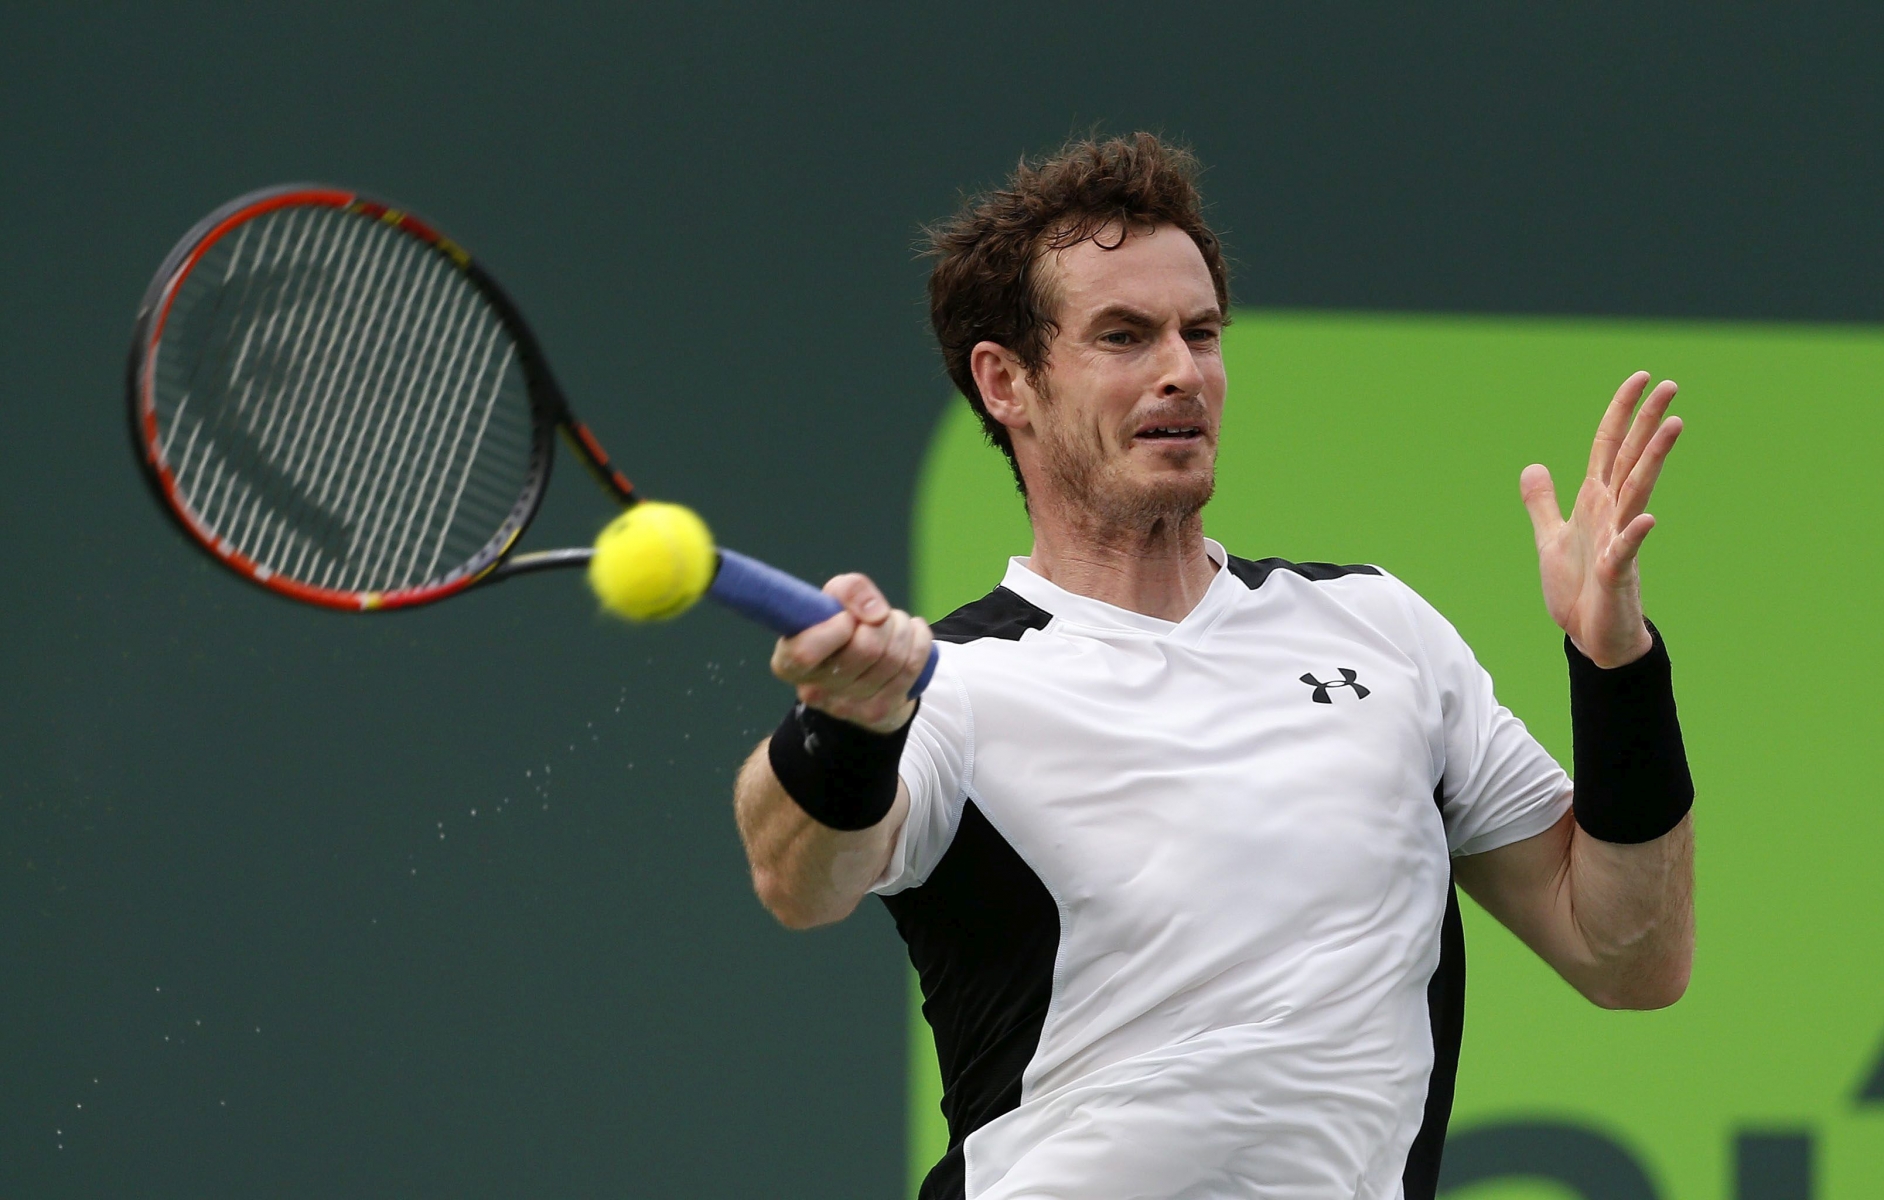 epa05234109 Andy Murray of Great Britain in action against Grigor Dimitrov of Bulgaria during their match at the Miami Open tennis tournament on Key Biscayne, Miami, Florida, USA, 28 March 2016.  EPA/RHONA WISE